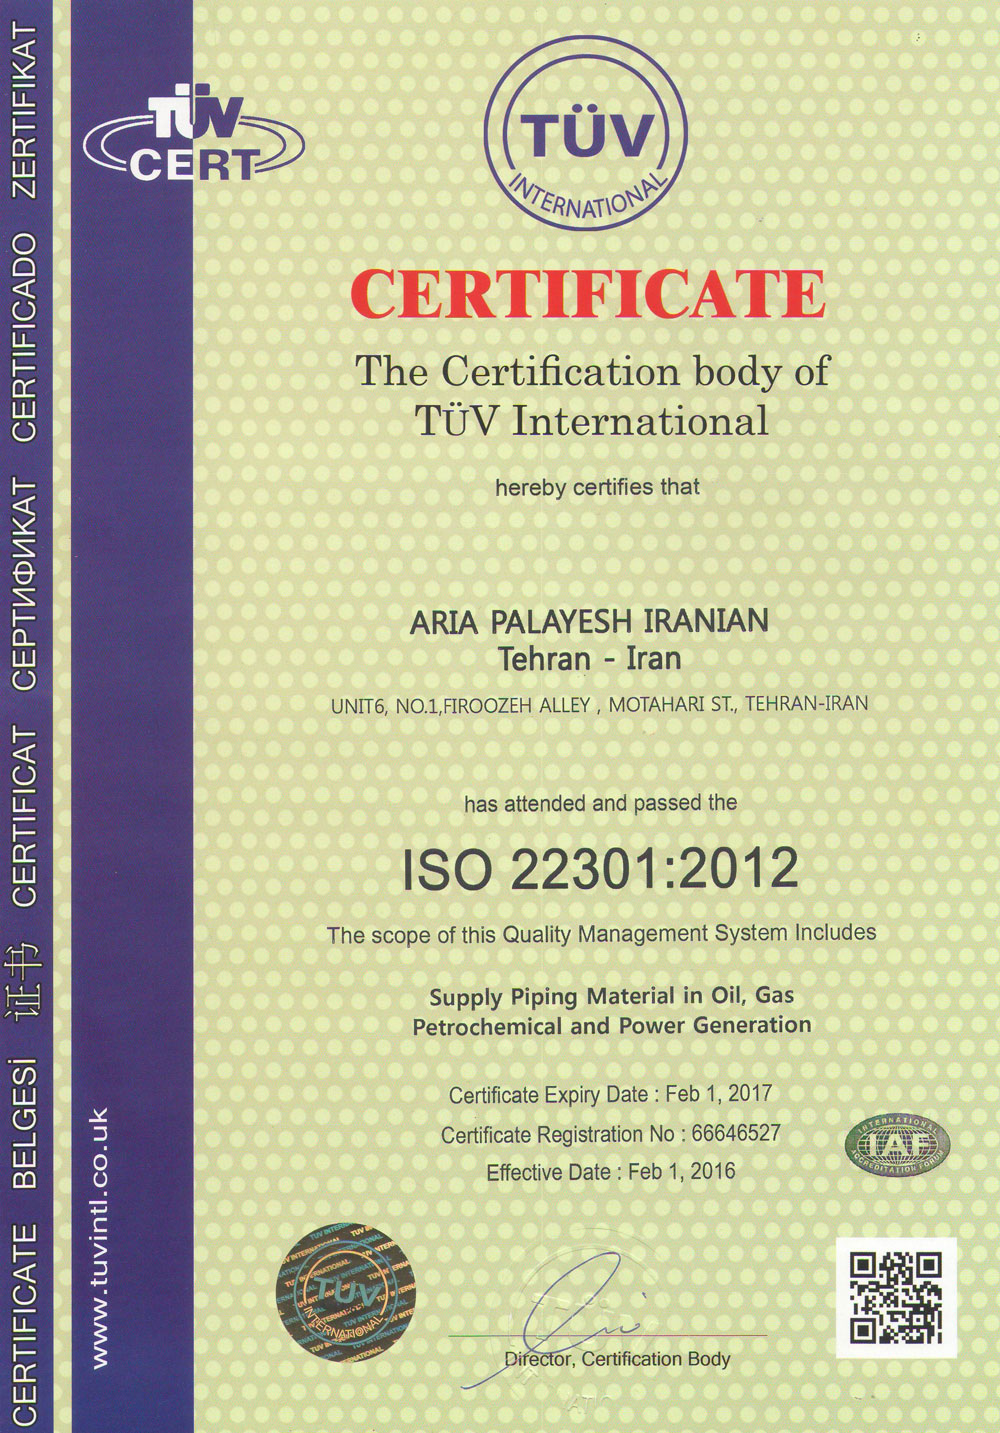 ISO 22301: 2012 Certificate